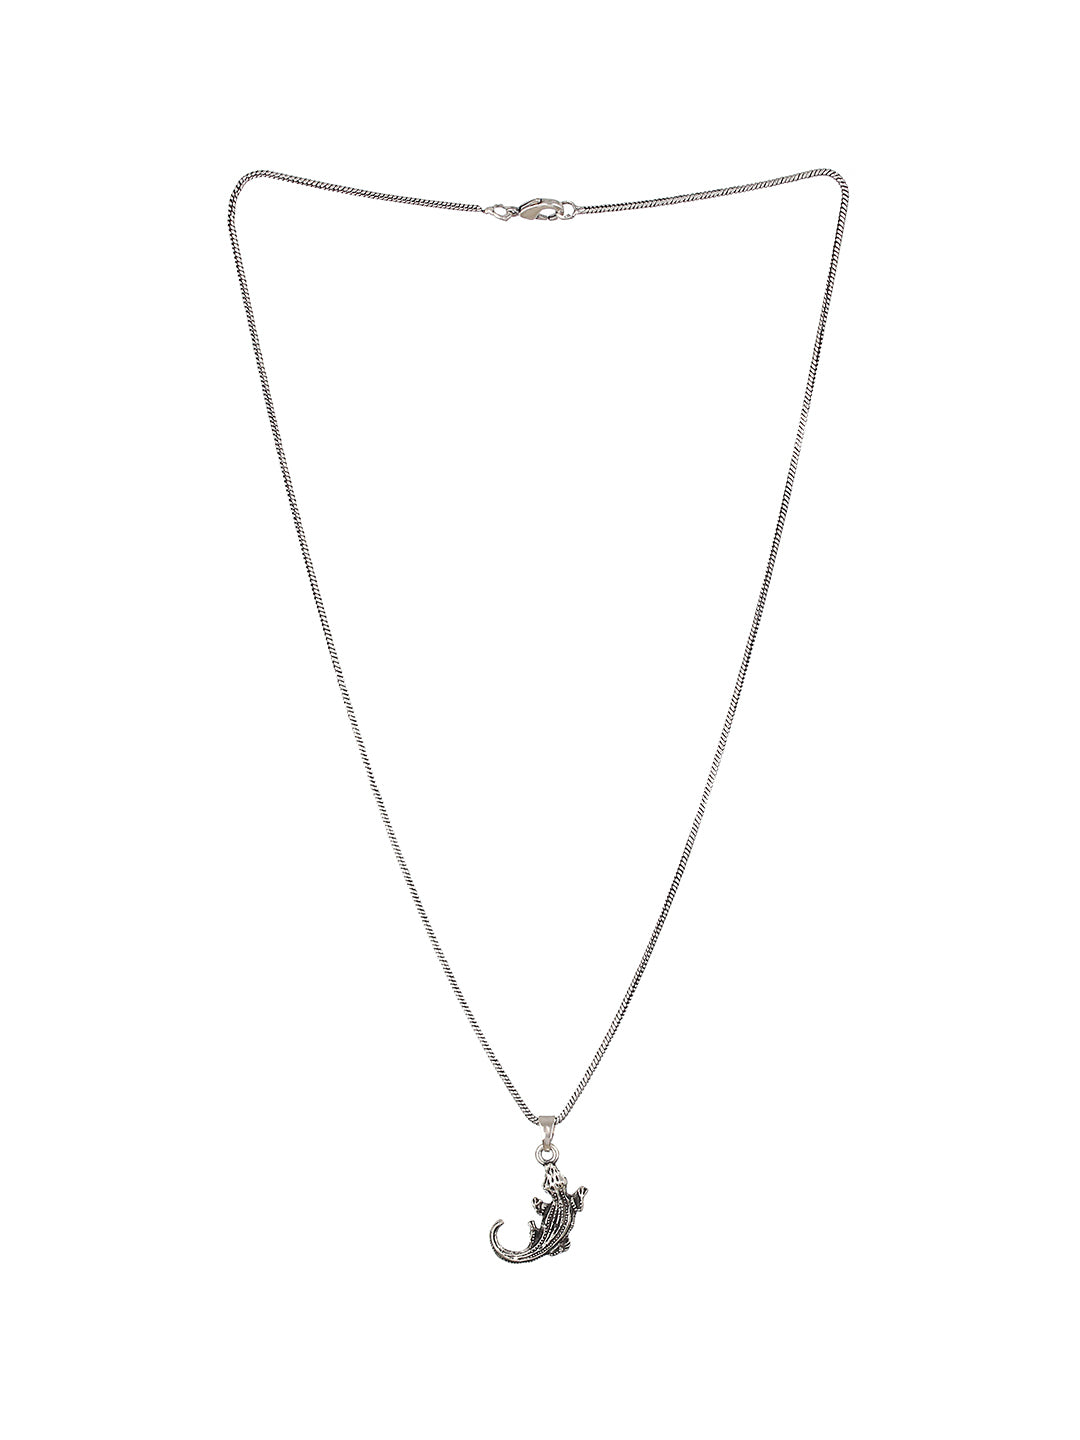 Bold by Priyaasi Crawling Lizard Silver-Plated Pendant Chain for Men